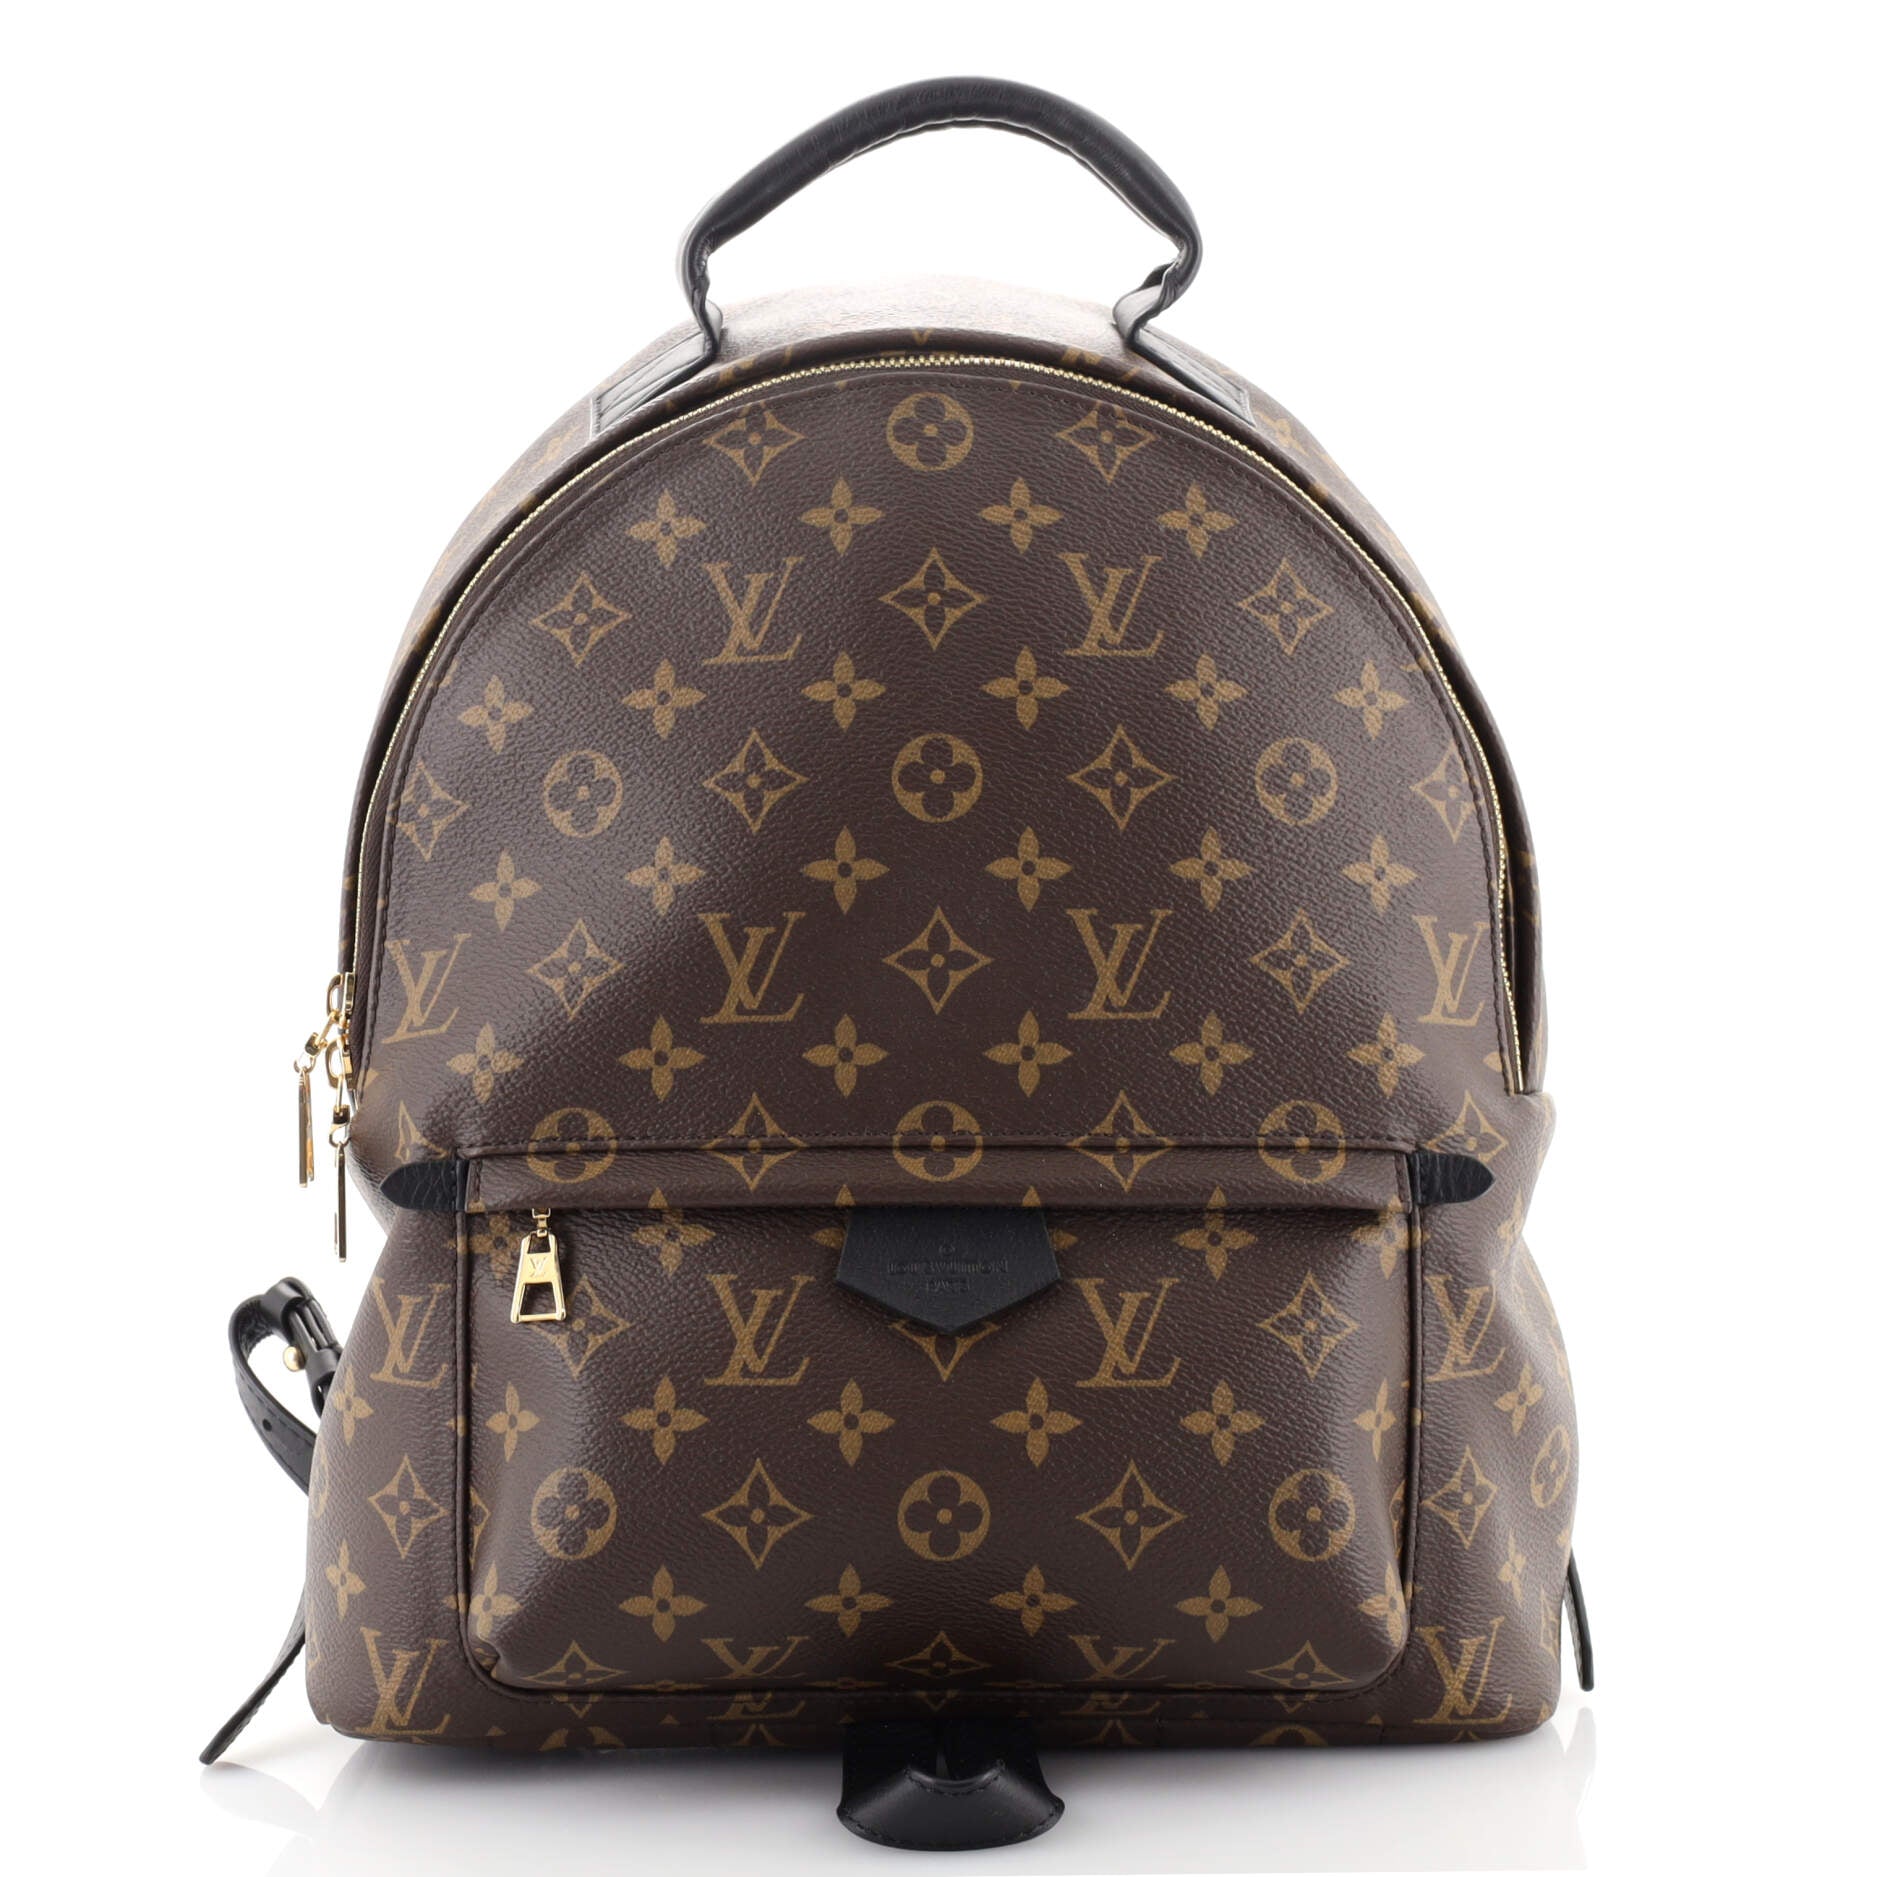 Louis Vuitton 2014 pre-owned Monogram Sac a Dos Bosphore Backpack